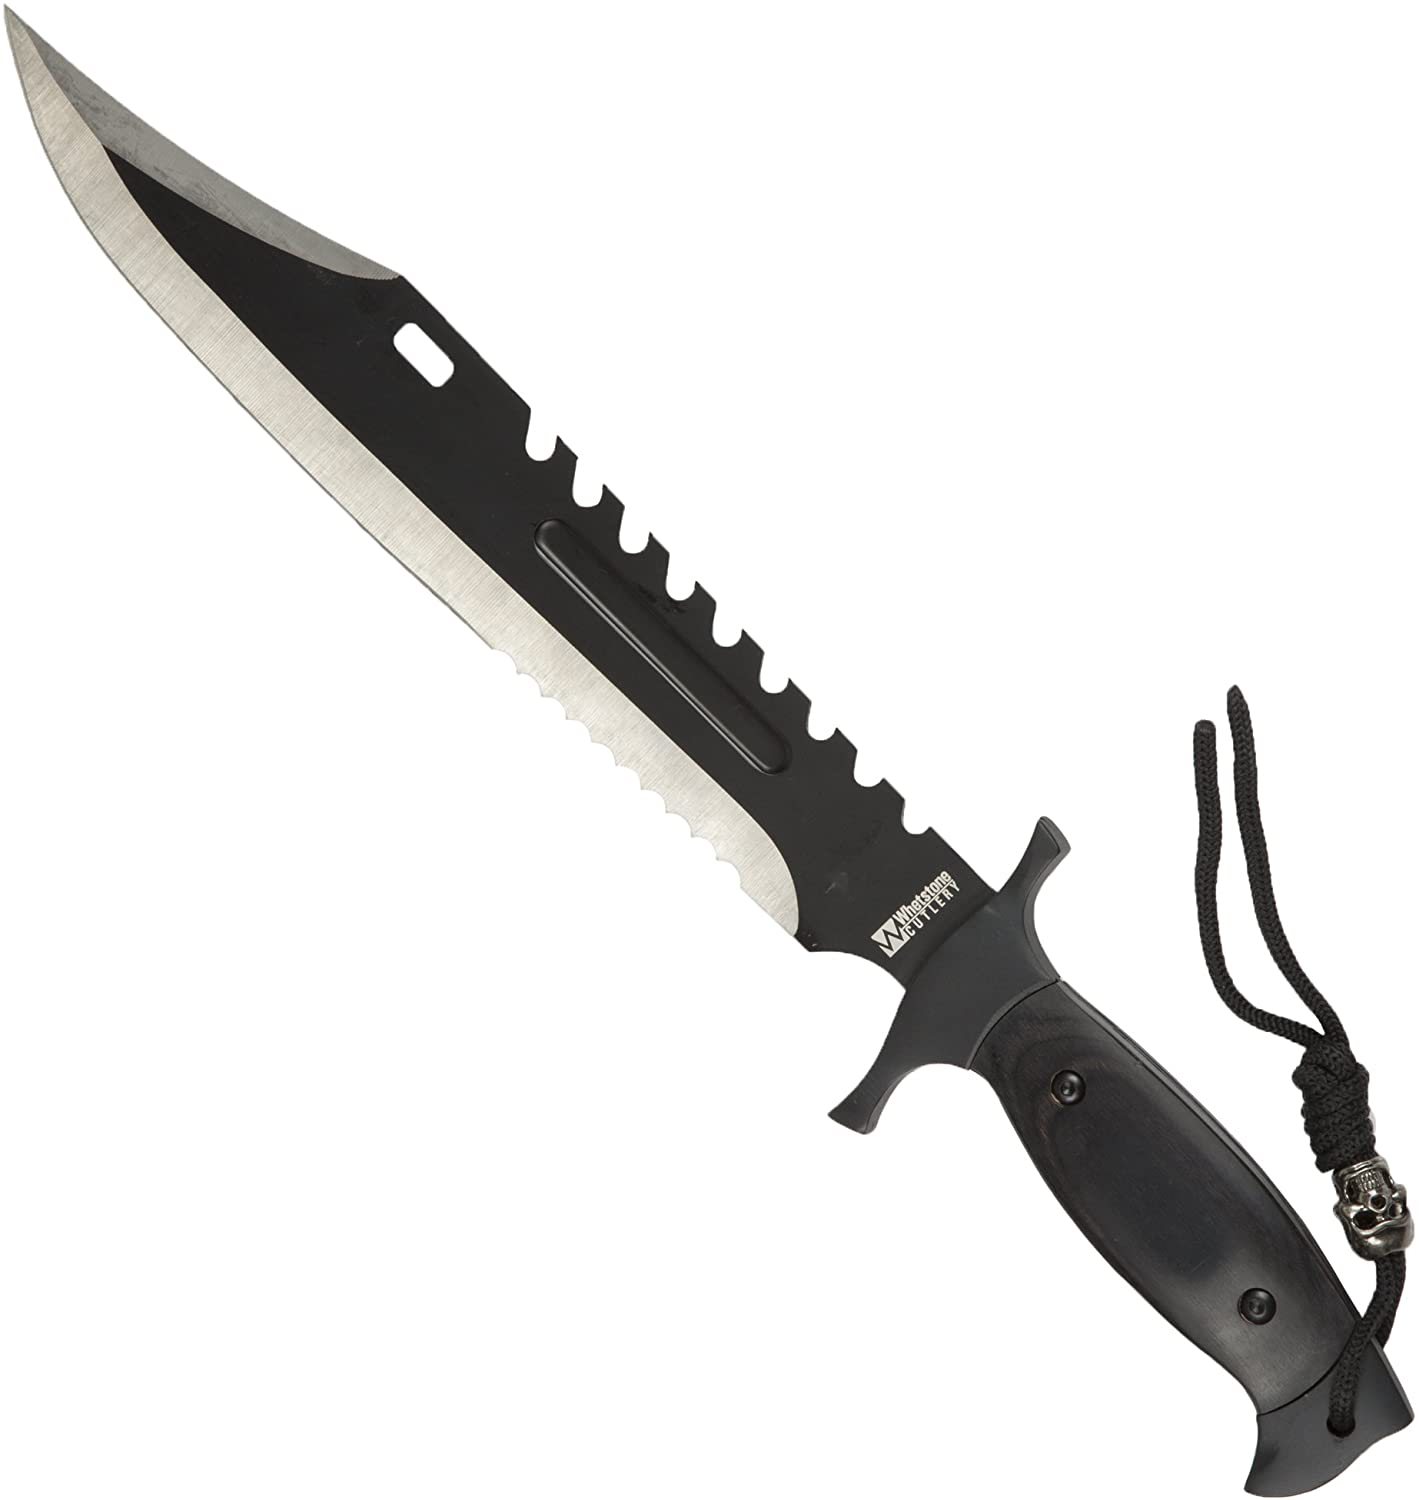 Whetstone Clip Saber 16” Bowie Knife